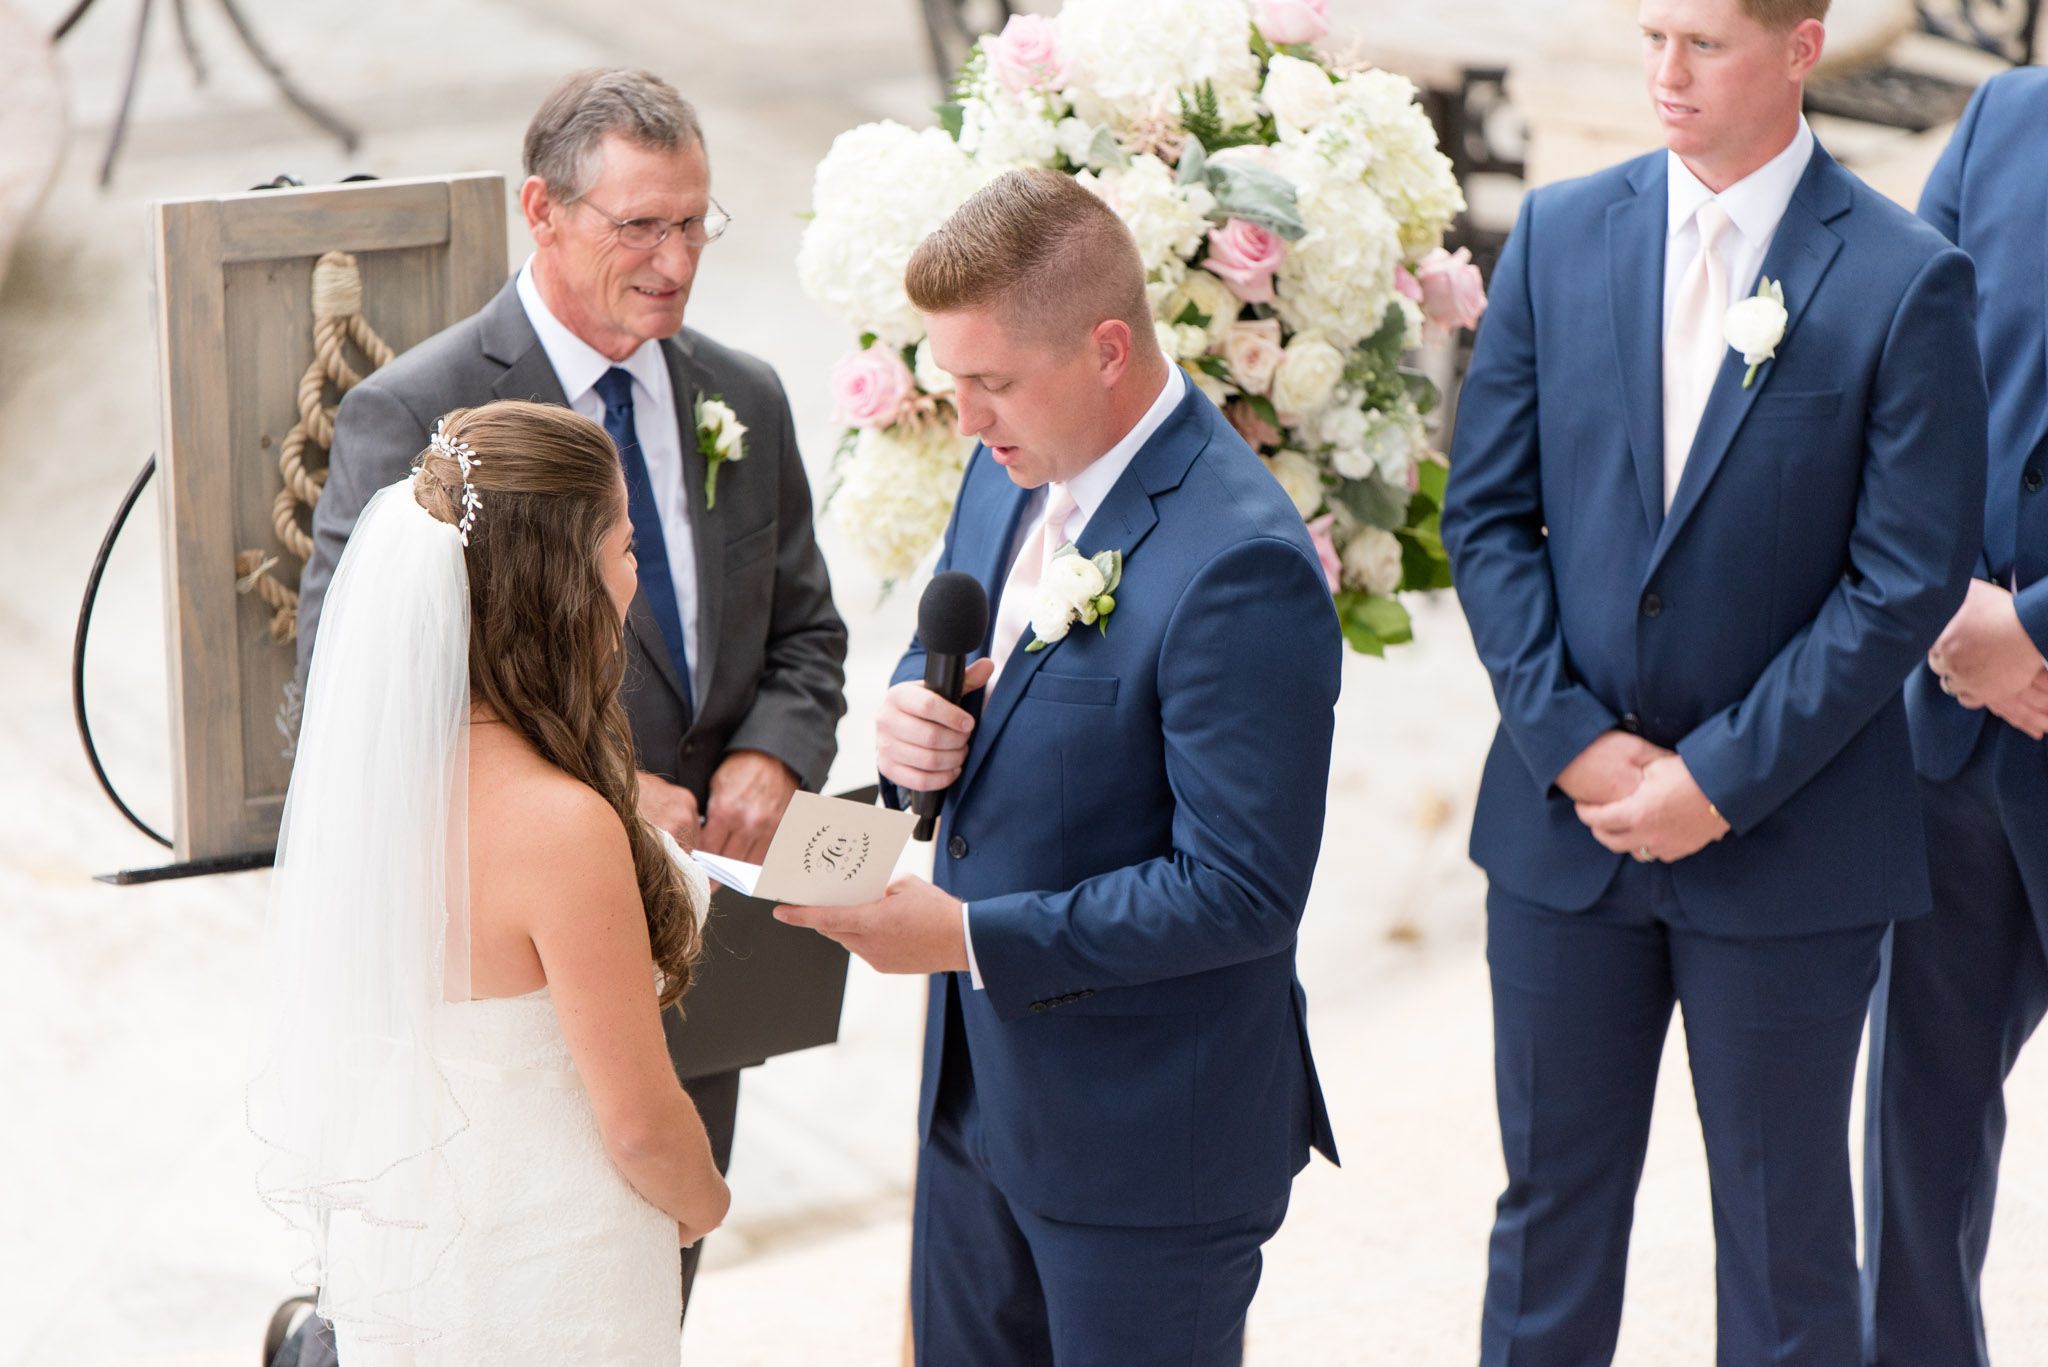 Groom reads vows to bride.